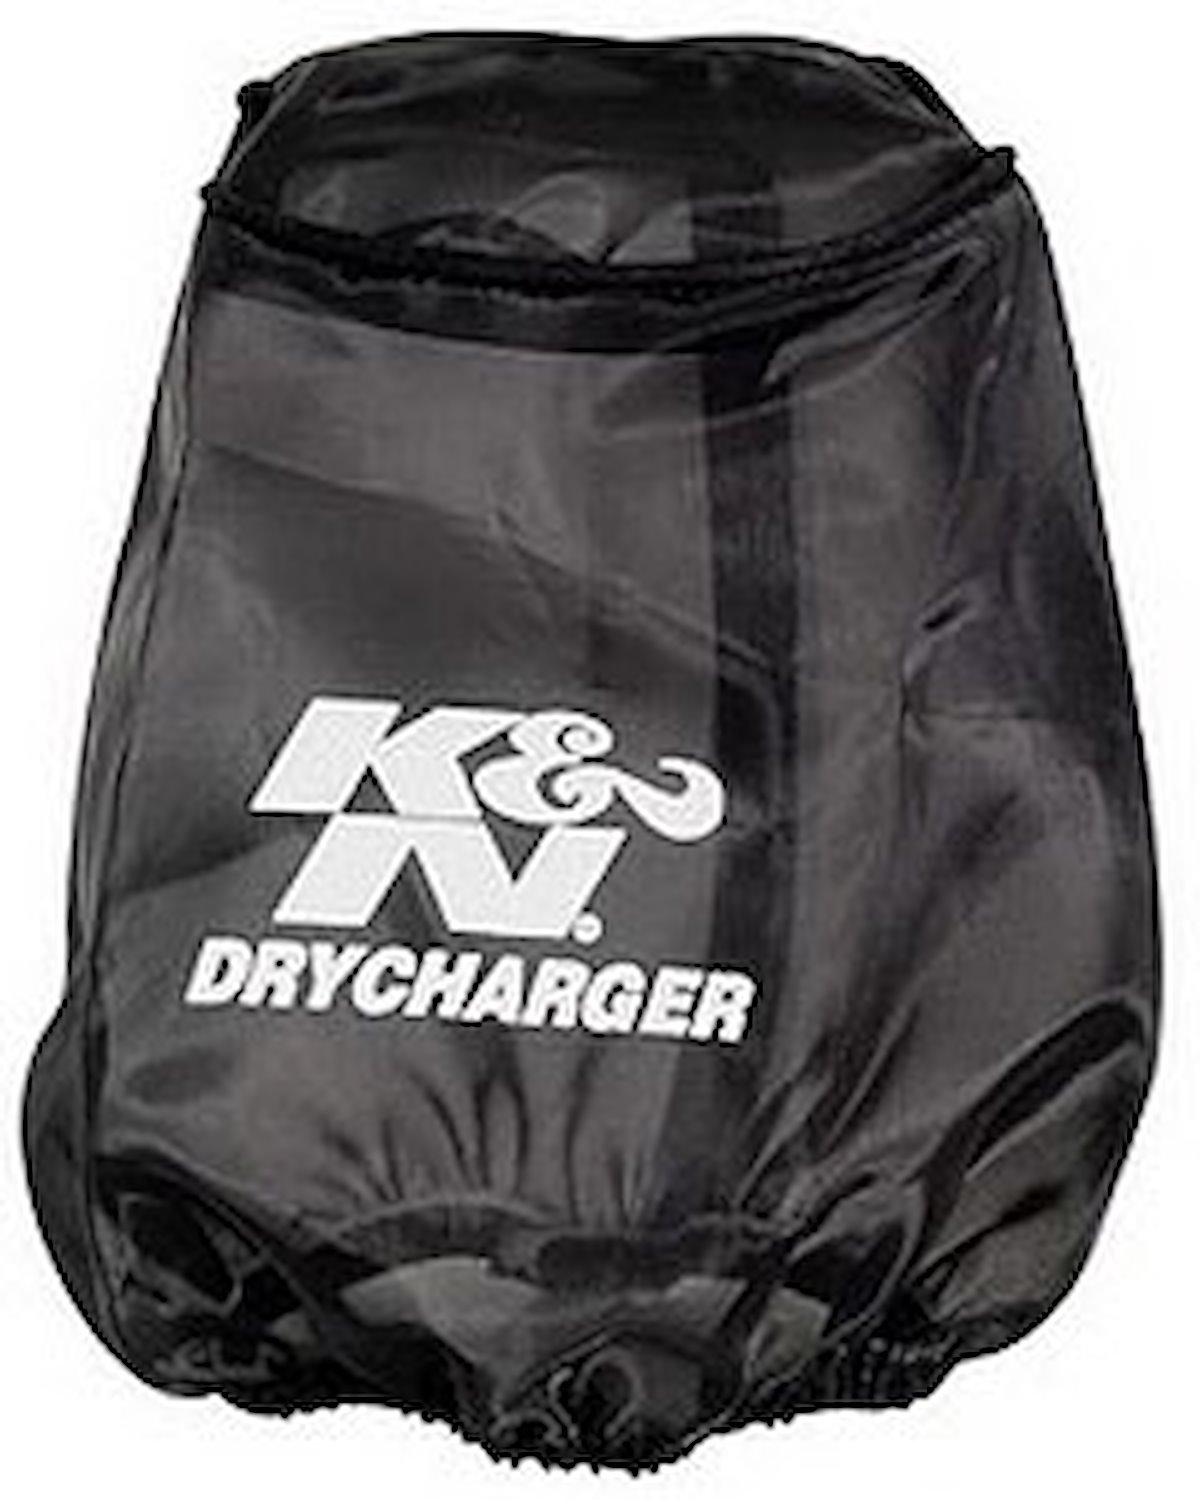 DryCharger Filter Wrap Black